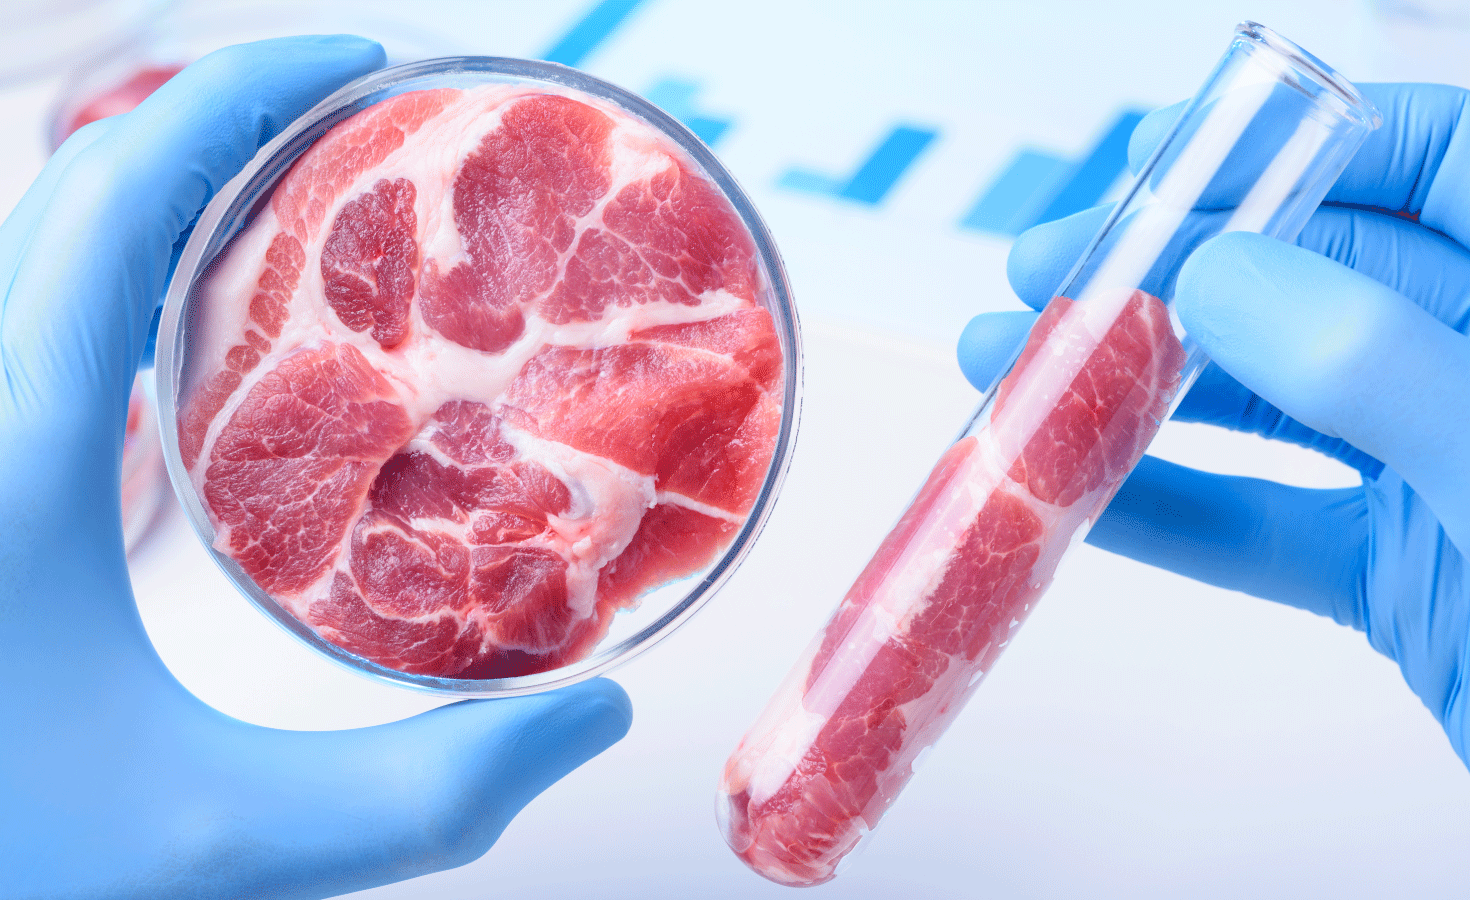 Are Meat Animal Practitioners Ready For Corporate Practice